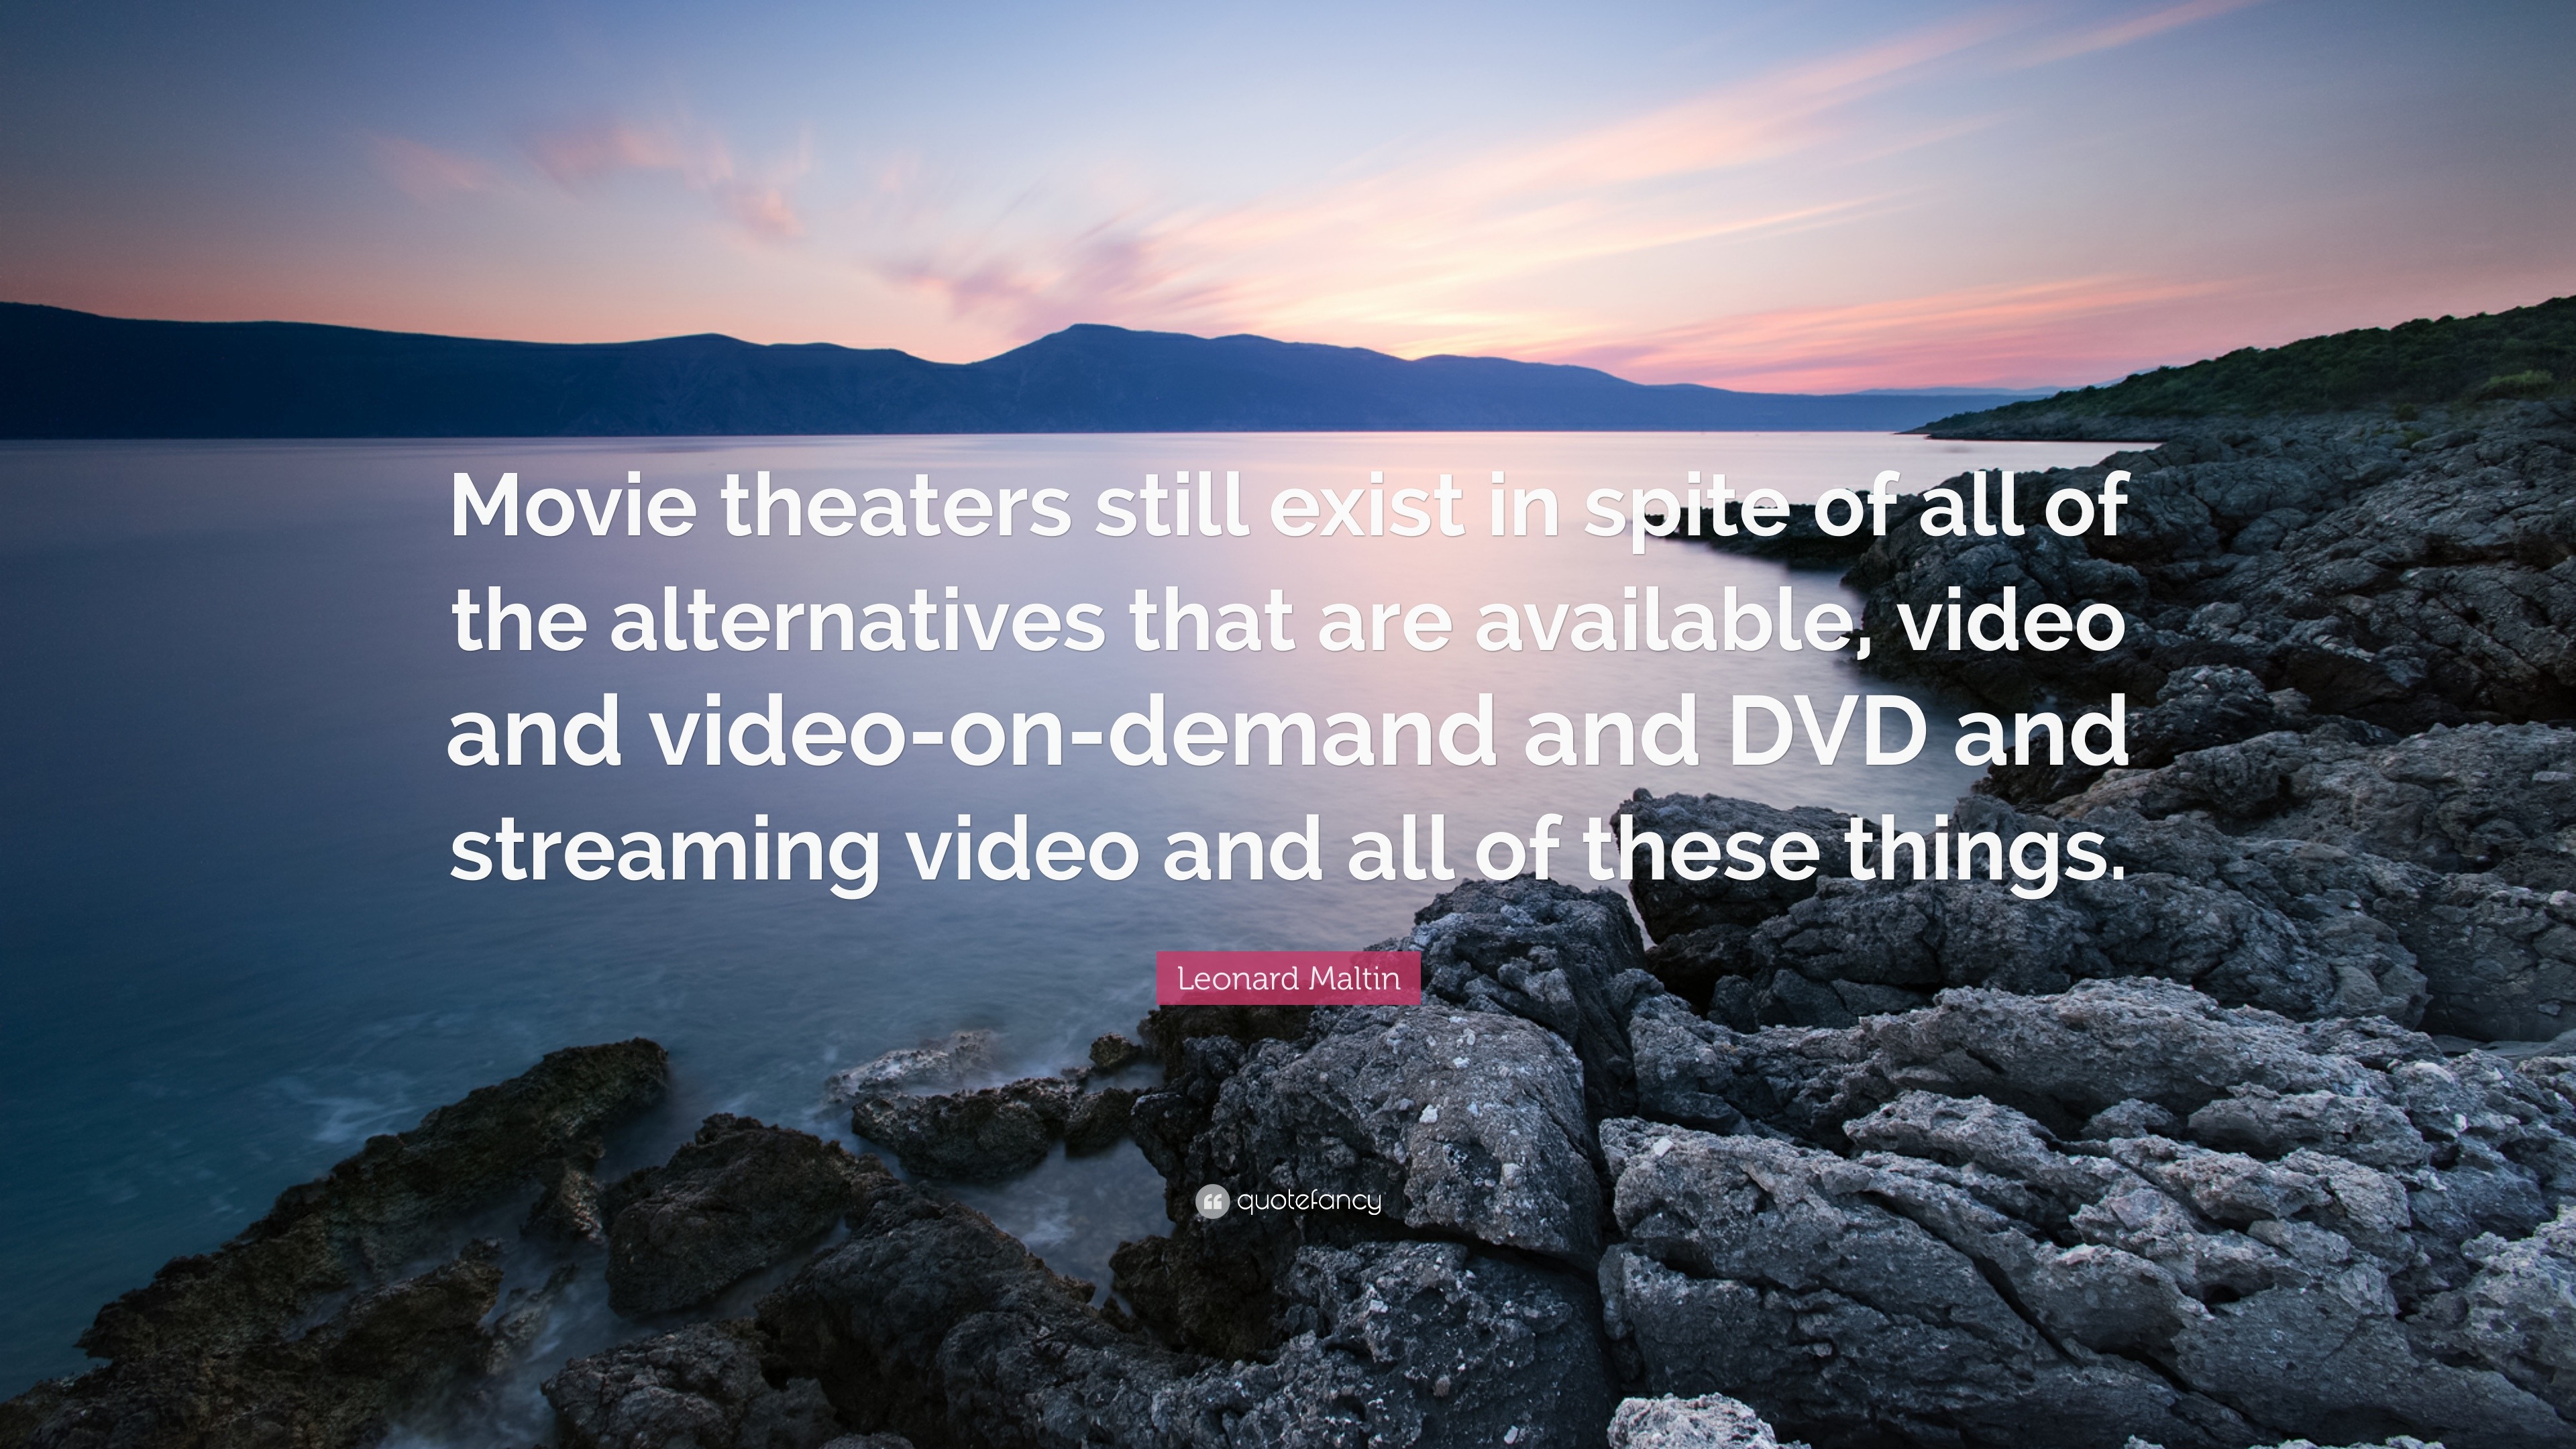 Leonard Maltin Quote “Movie theaters still exist in spite of all of the alternatives that are available, video and video-on-demand and DVD and...”